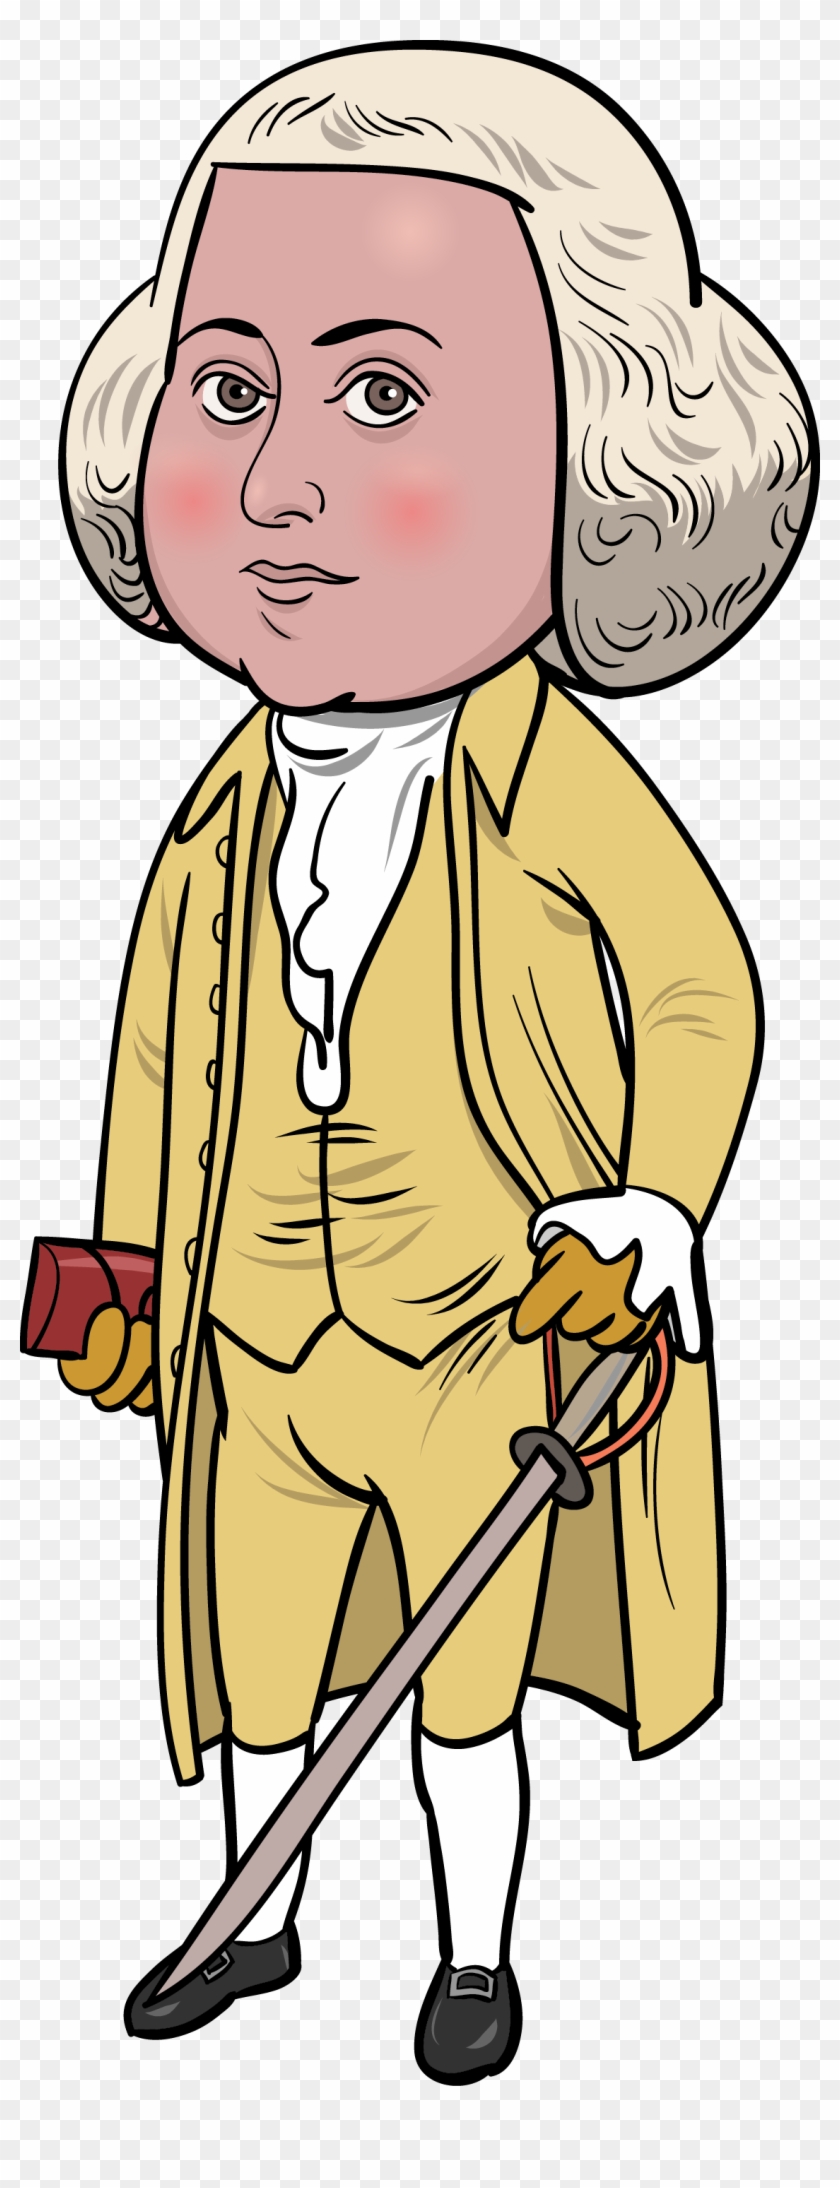 Picture Royalty Free Stock Working For Thus We Have - Cartoon Picture Of John Adams Clipart